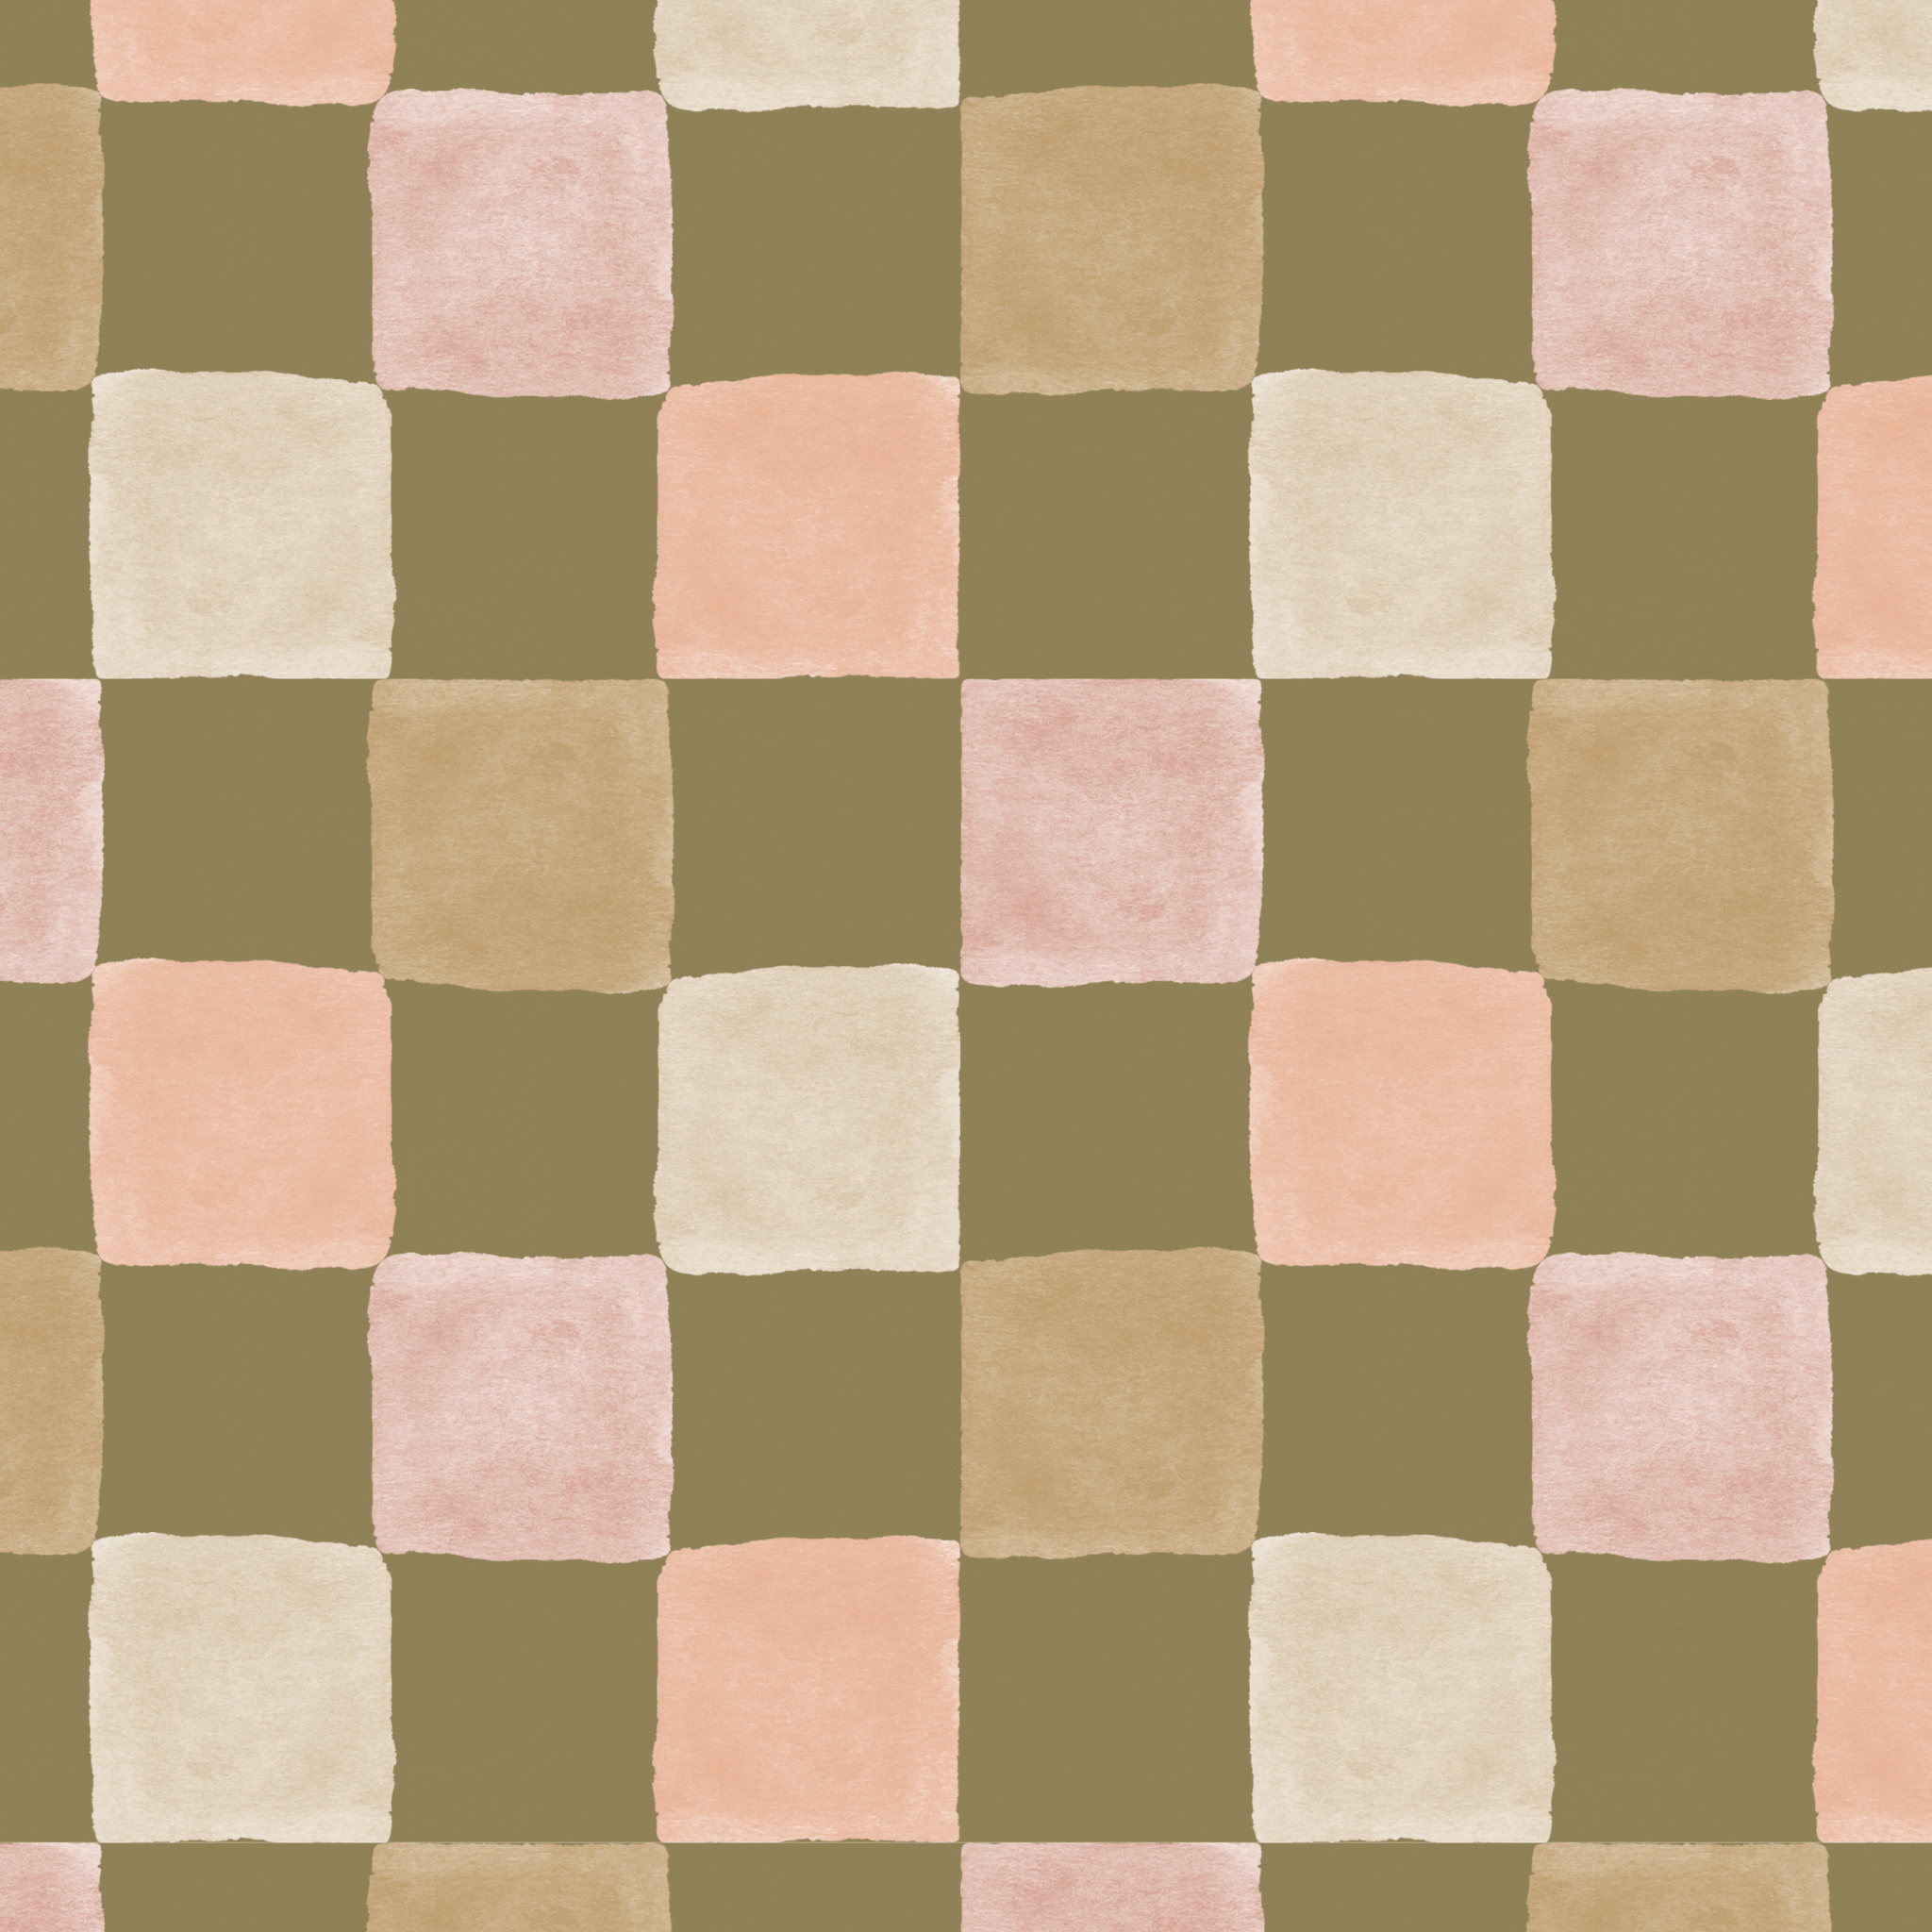 Seamless pattern sample with a neopolitan color palette featuring checkered squares in shades of pink, beige, and olive green